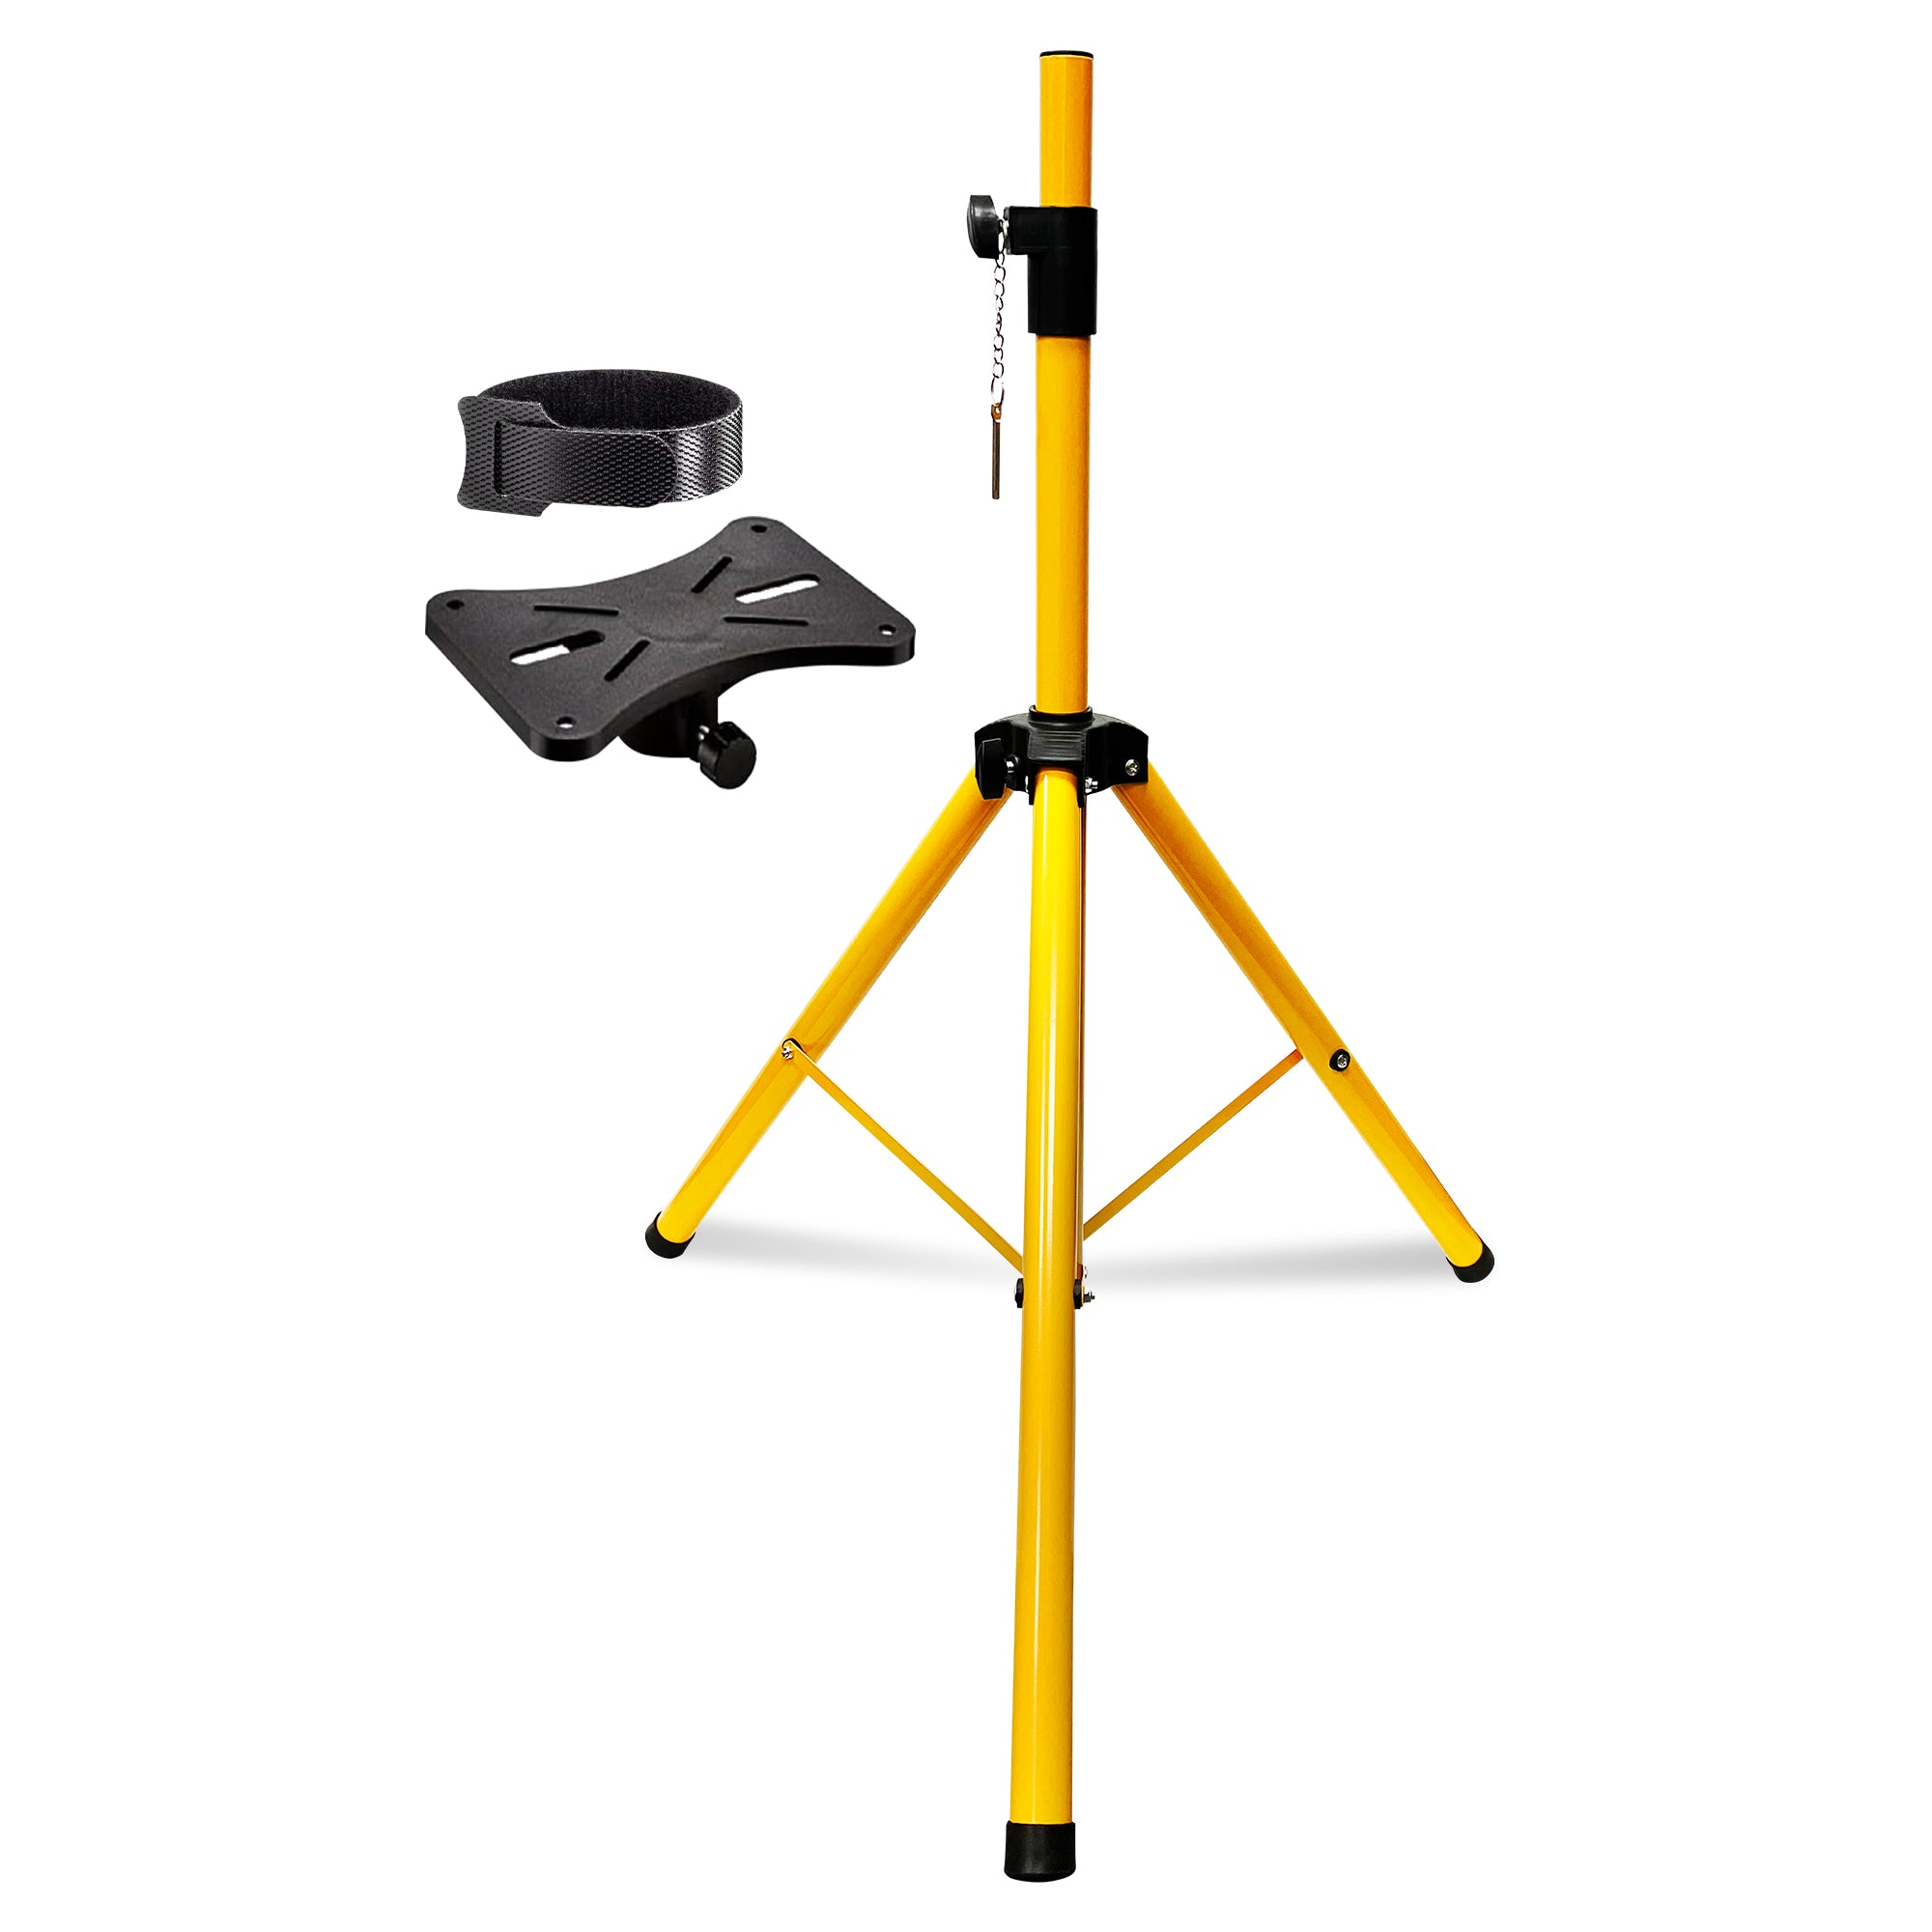 5 Core PA Speaker Stands Short Height Adjustable Professional DJ Tripod with Mounting Bracket, Extend from 40 to 72 inches, yellow SS ECO 1PK YLW WoB